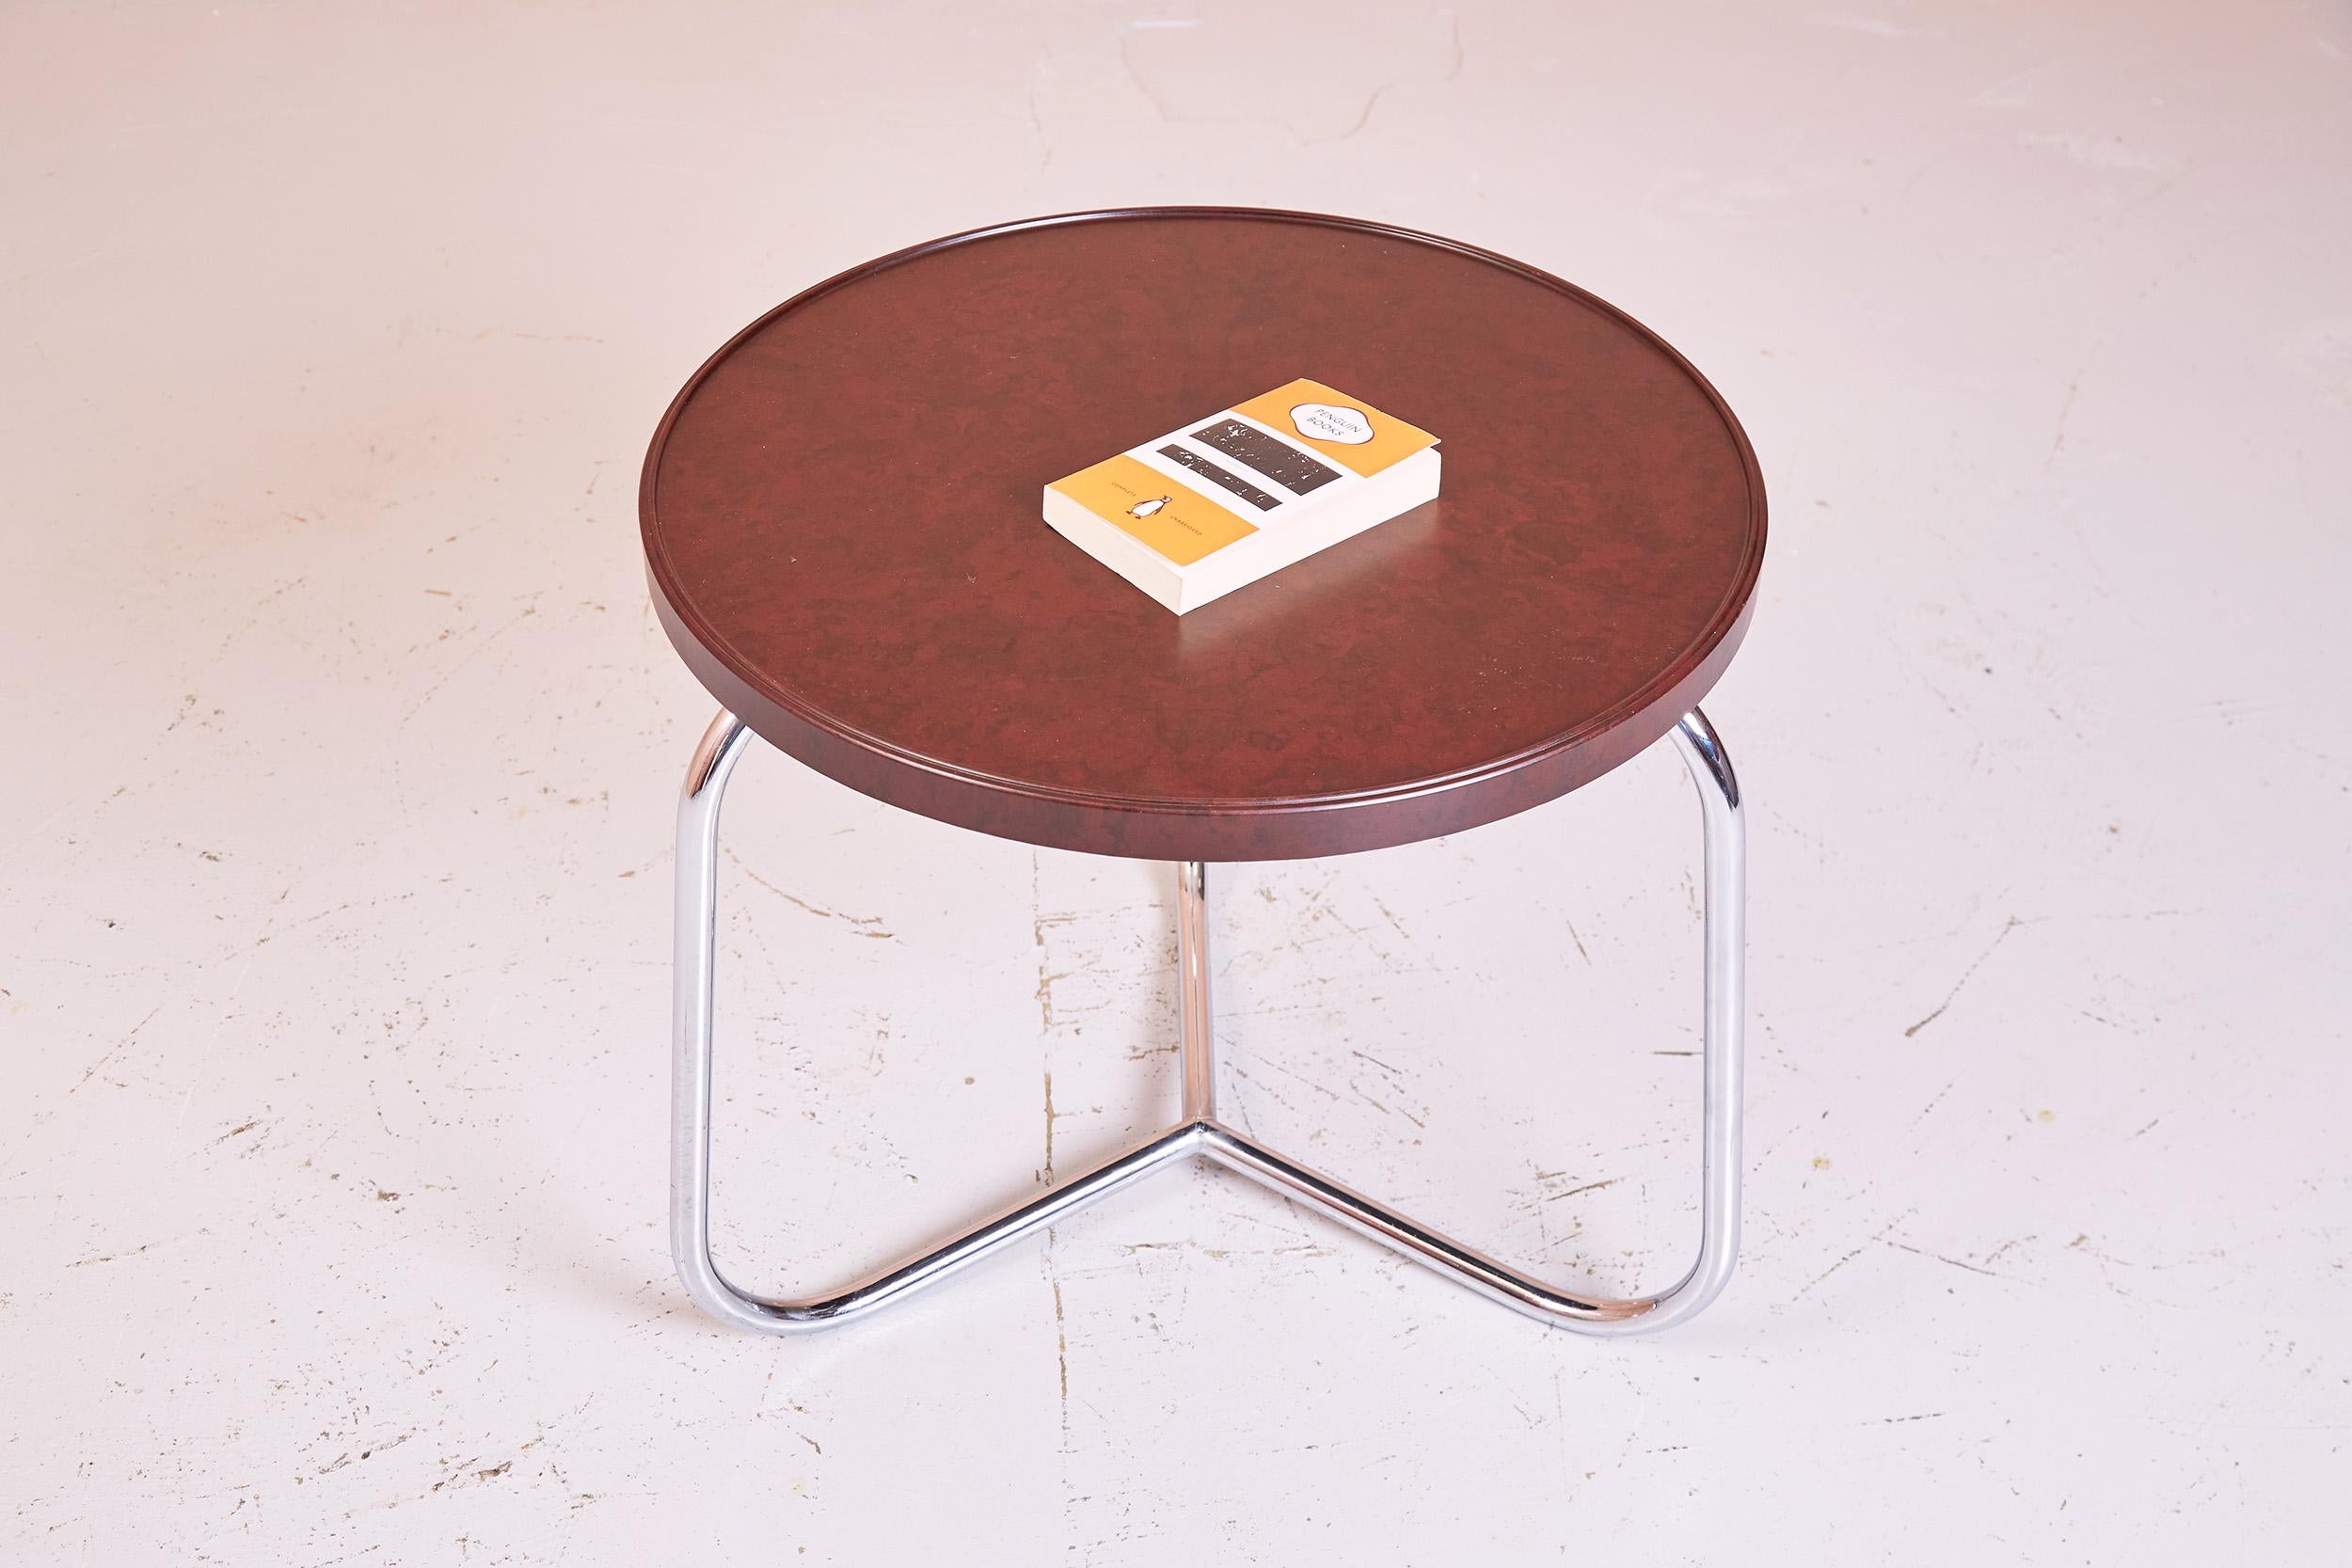 Steel Bakelite Mid Century Round Side Table with Chrome Base Airborne Furniture, 1940s